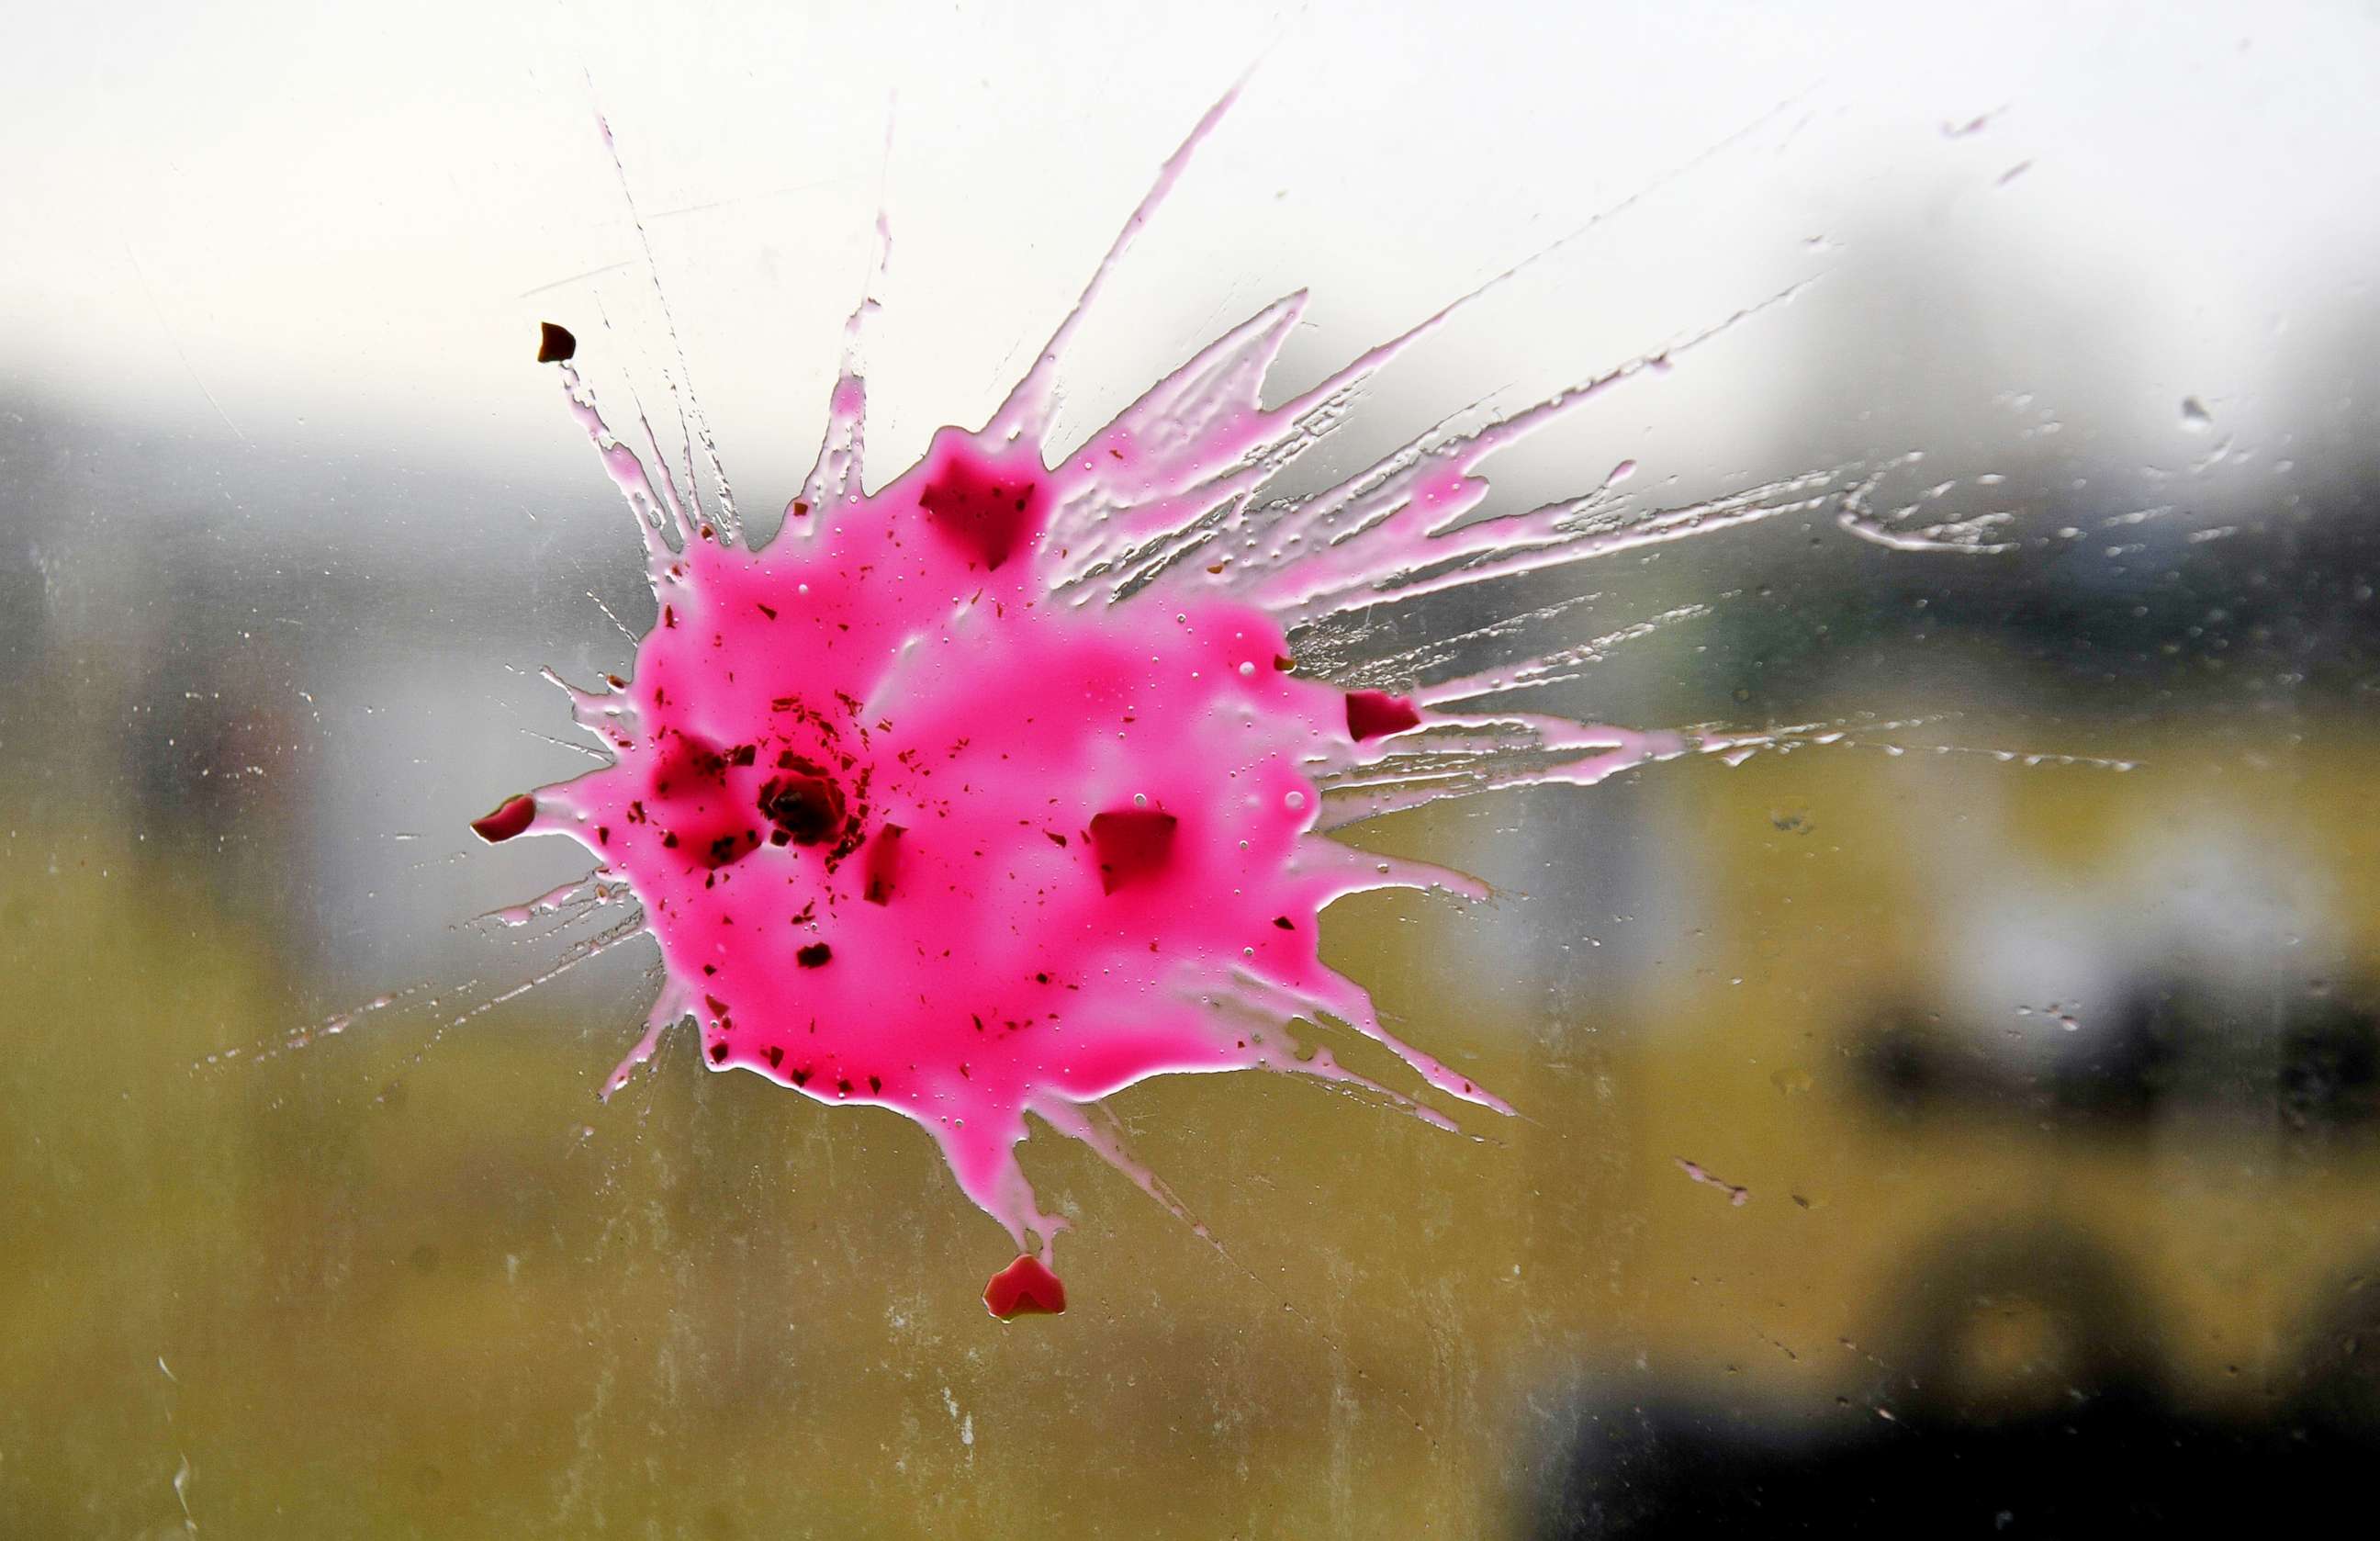 PHOTO: A Paint ball bullet is pictured from a bus window on Dec. 4, 2011.